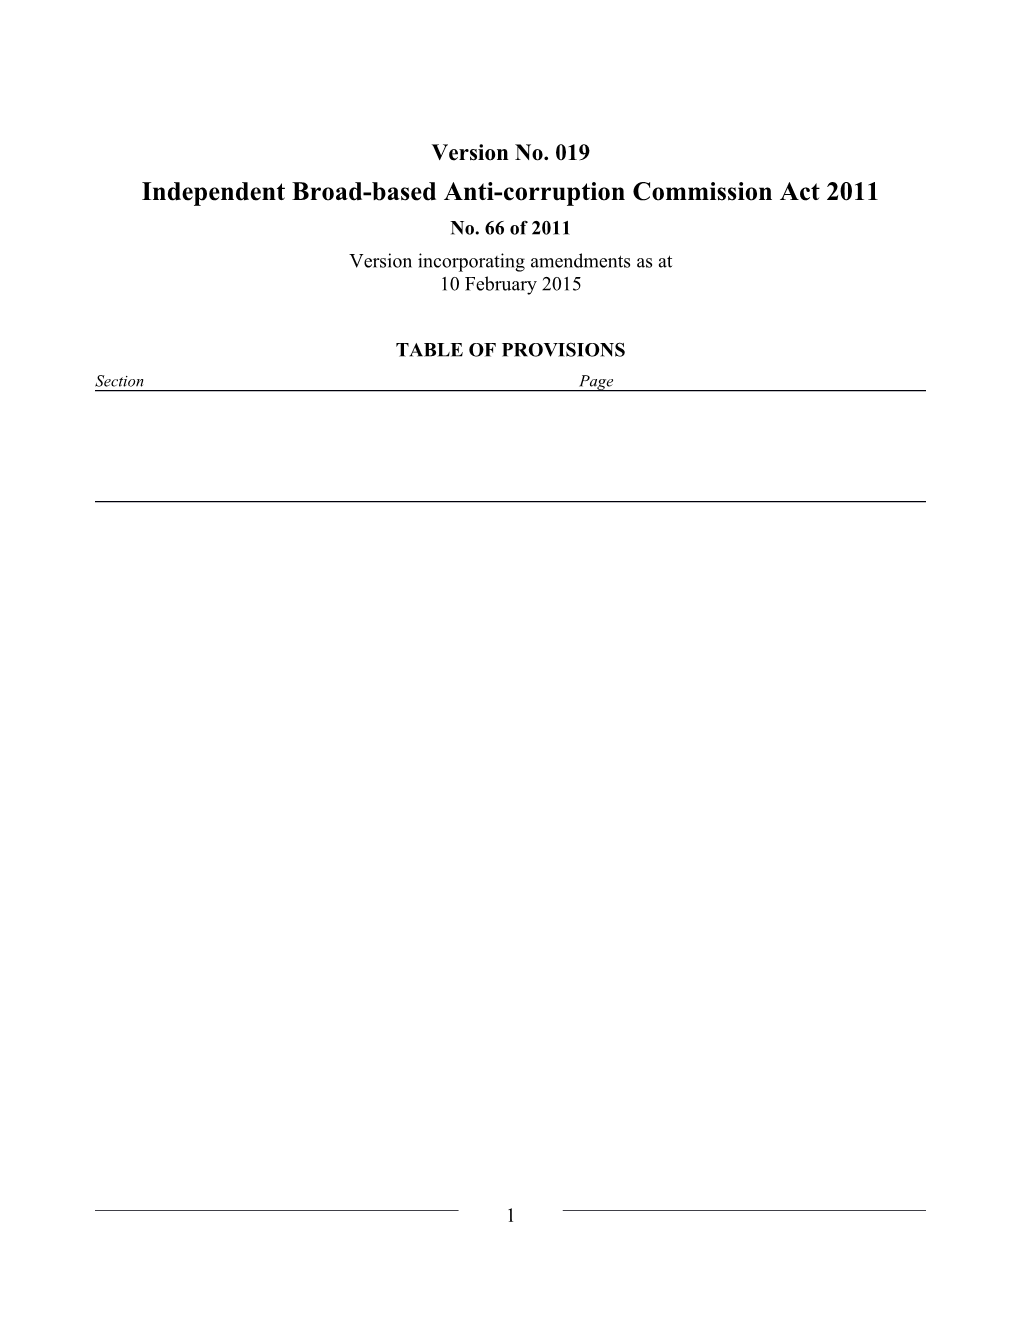 Independent Broad-Based Anti-Corruption Commission Act 2011